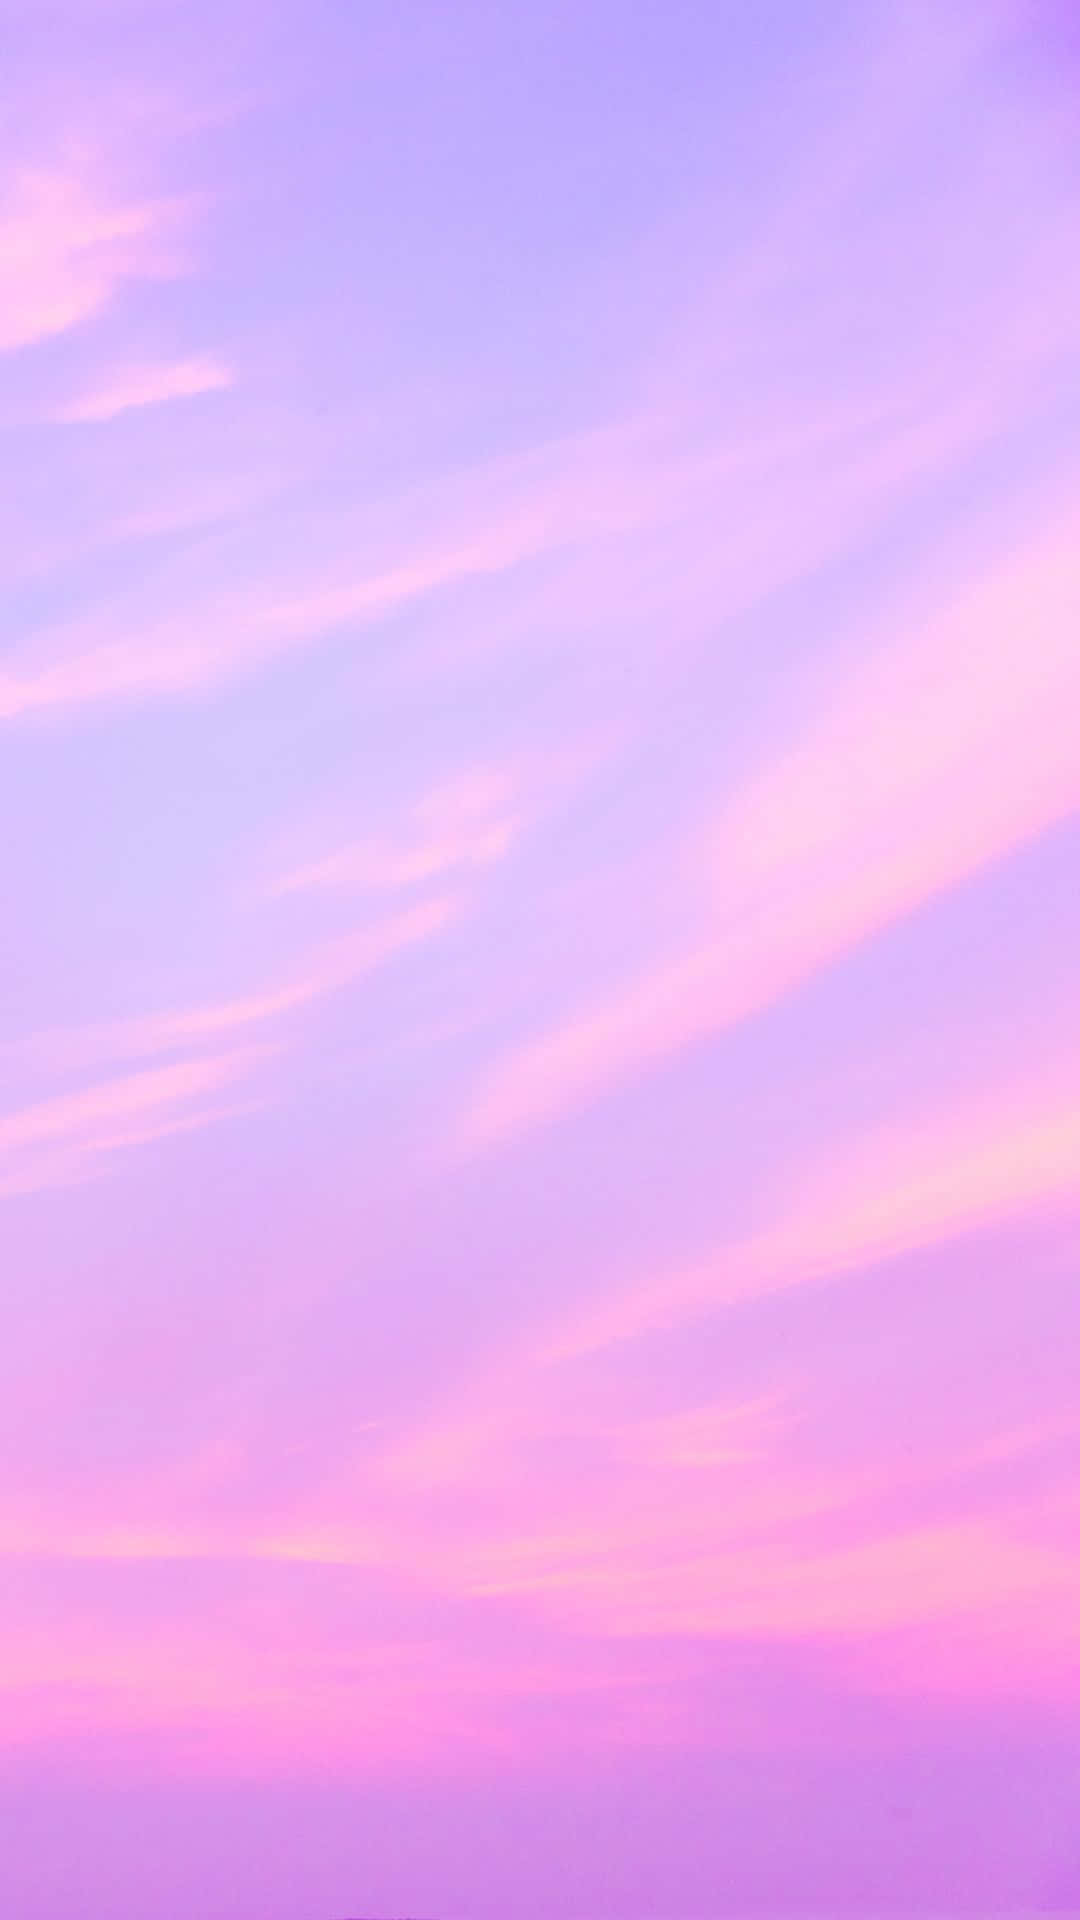 Aesthetic Clouds Pastel Purple Sky Background